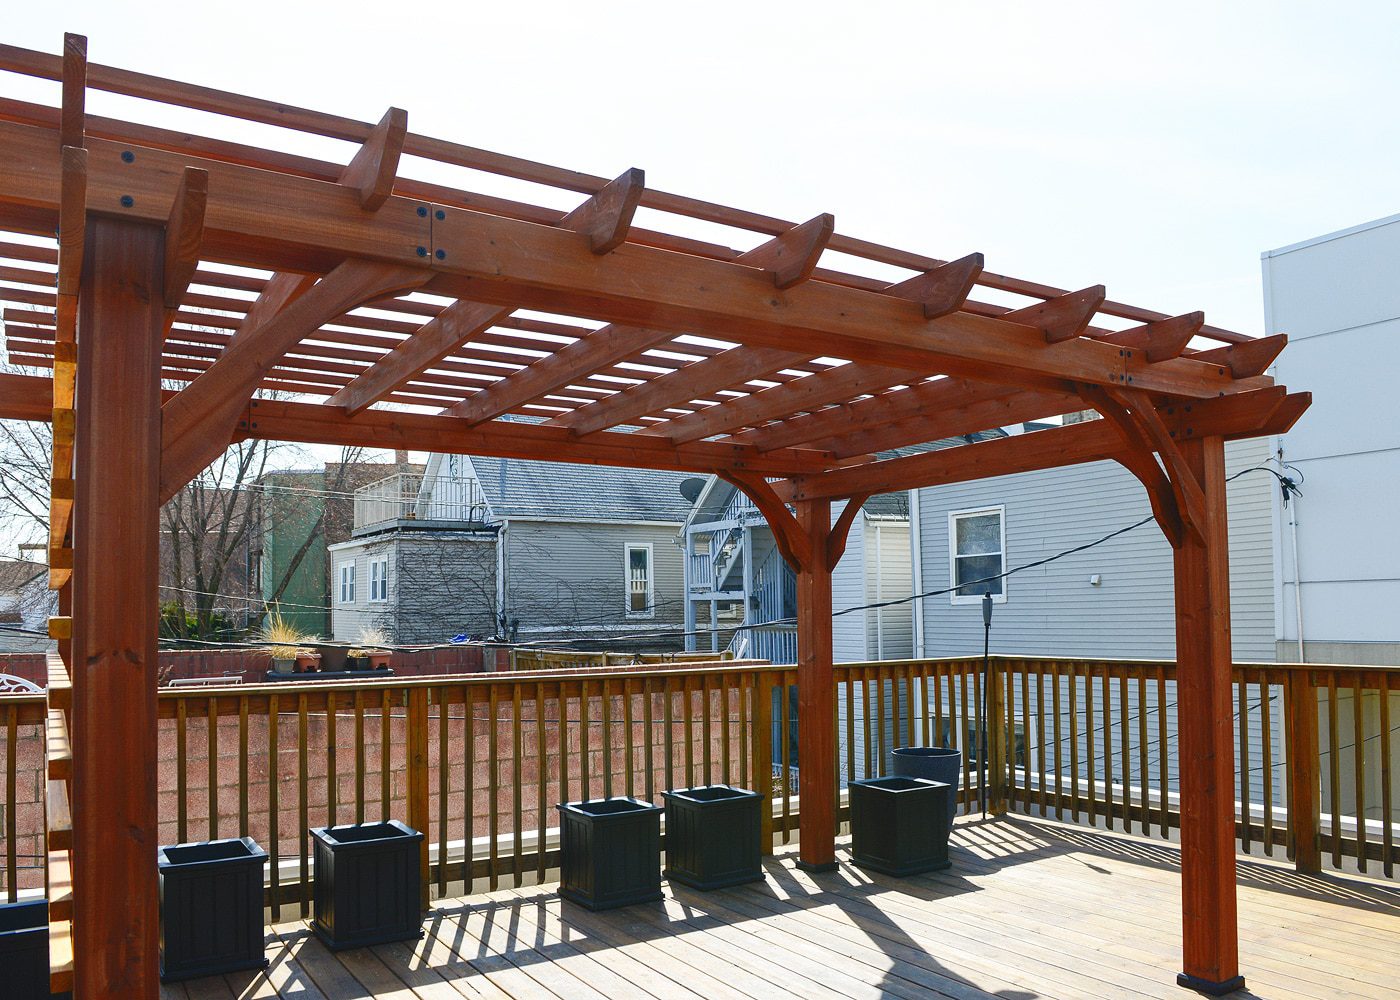 A DIY pergola for a rooftop patio | via Yellow Brick Home, in partnership with Lowe's Home Improvement